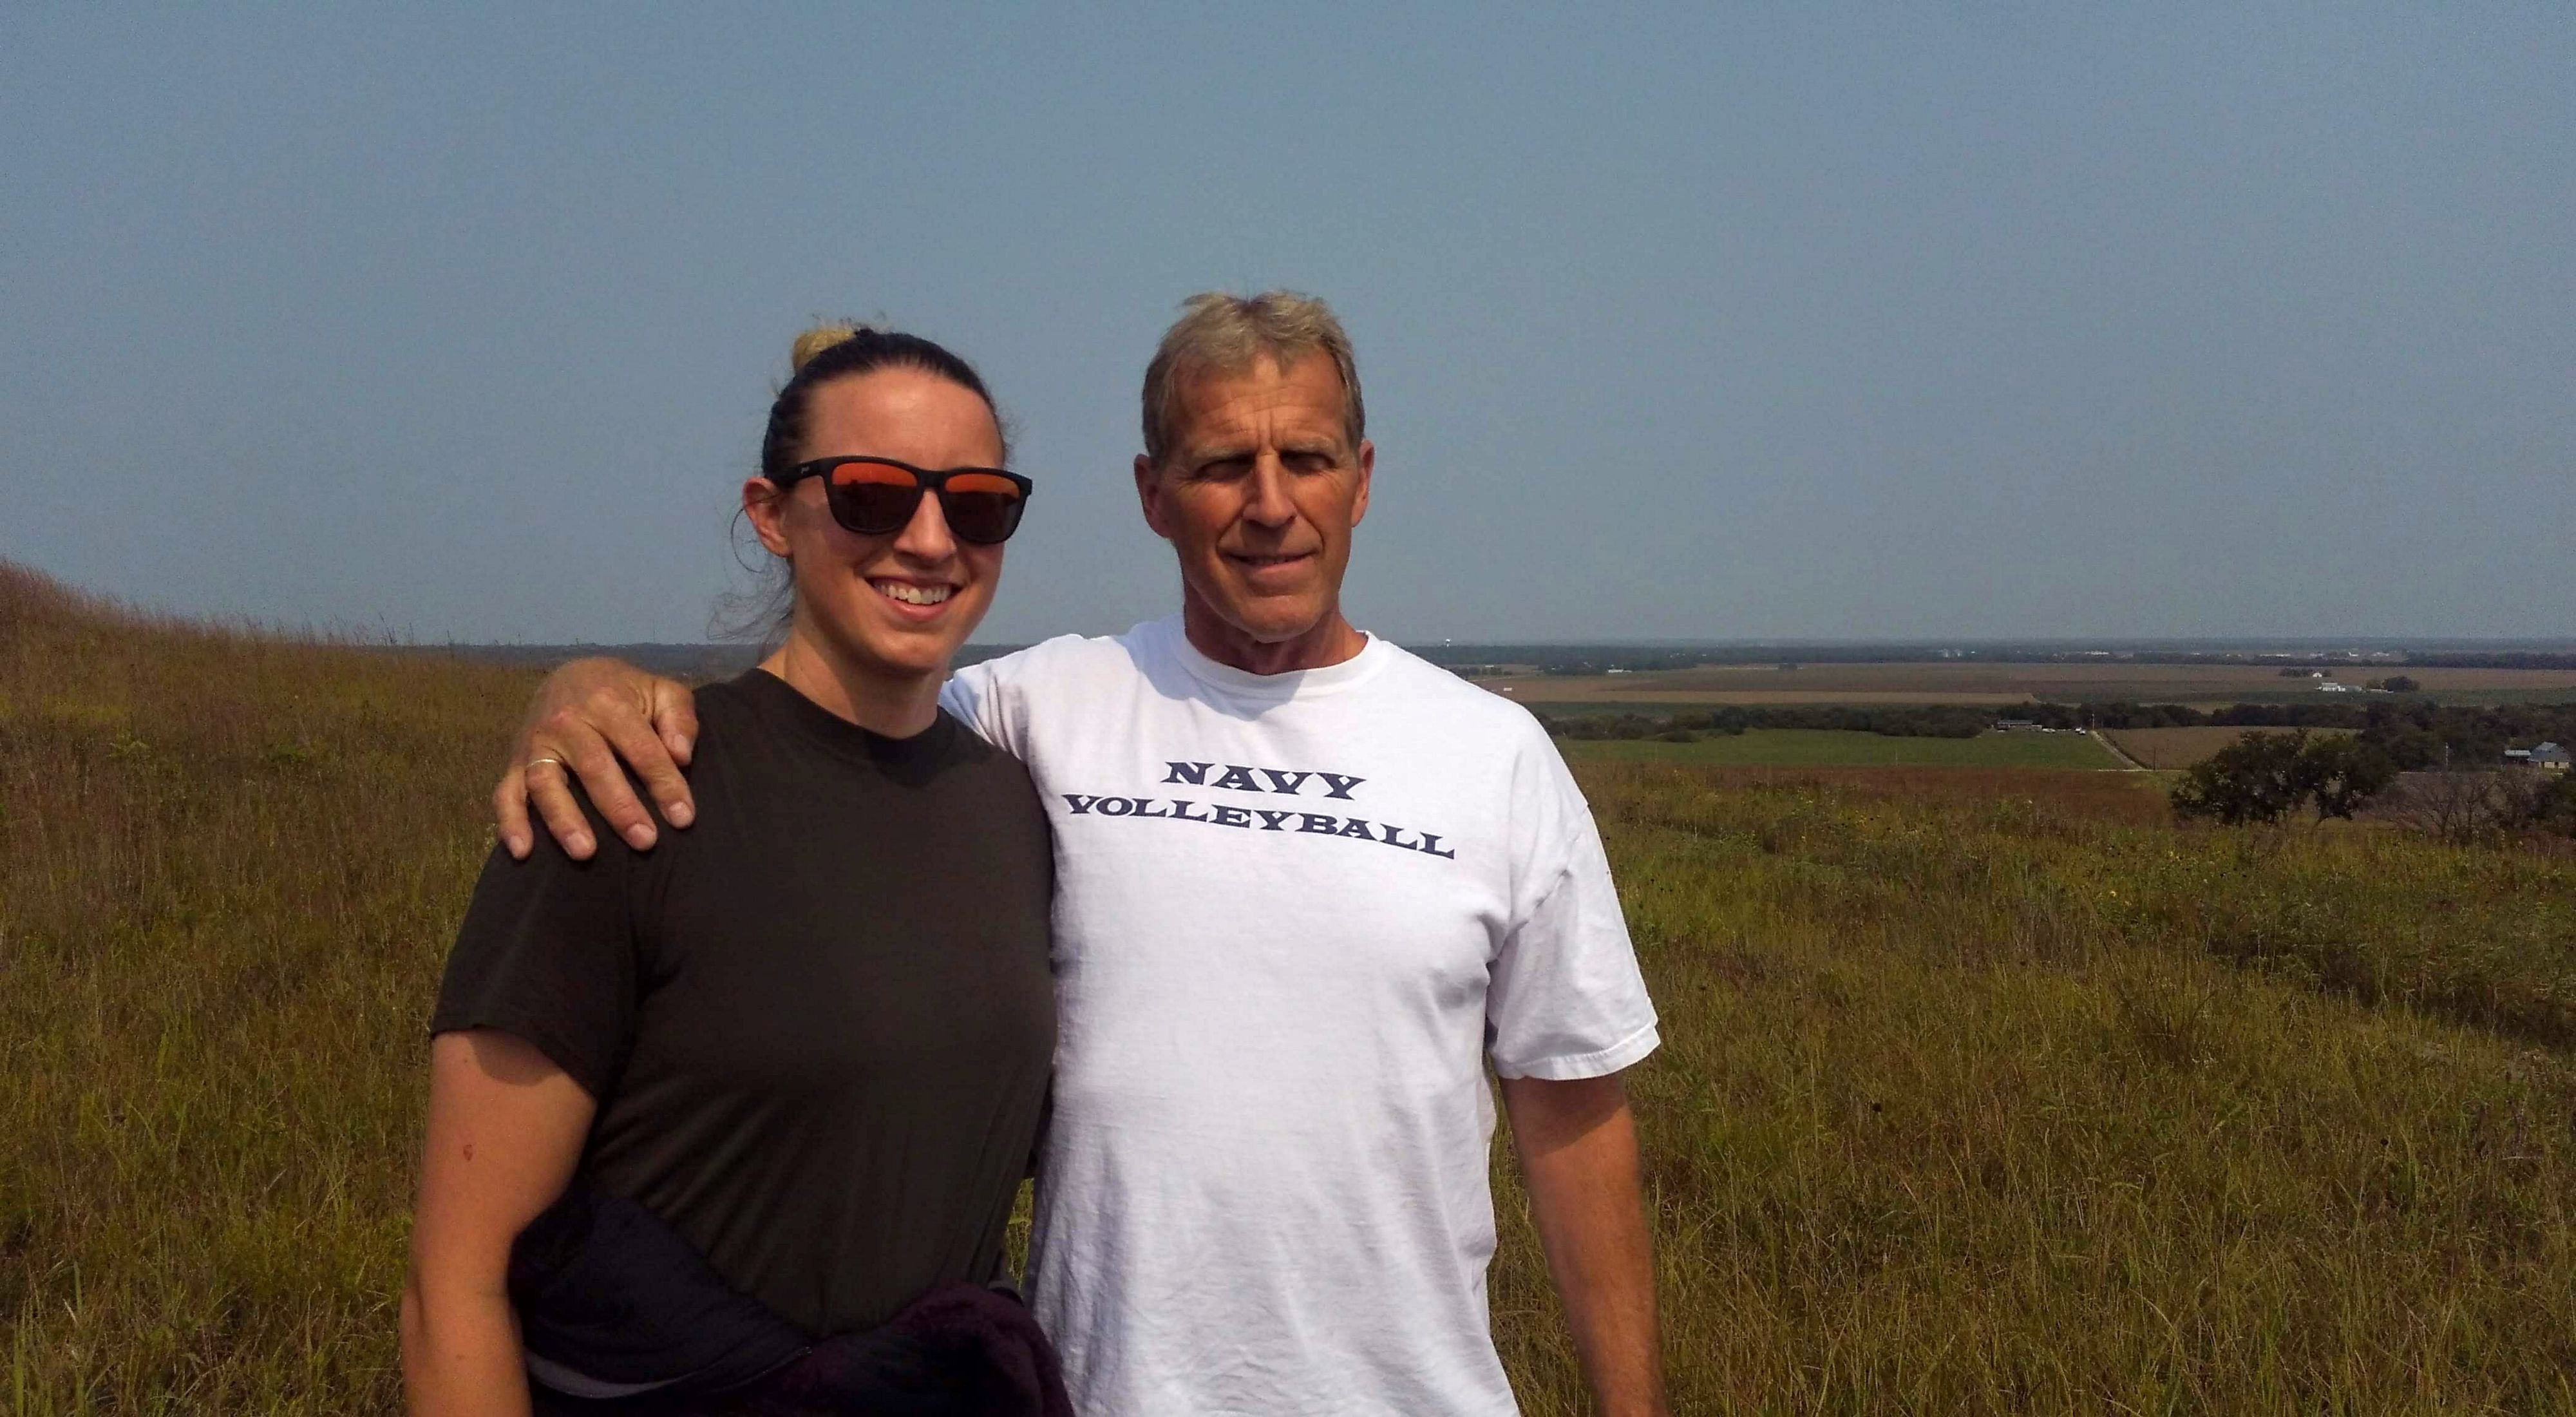 A young woman with her father who has his arm around her standing in wide open prairie.